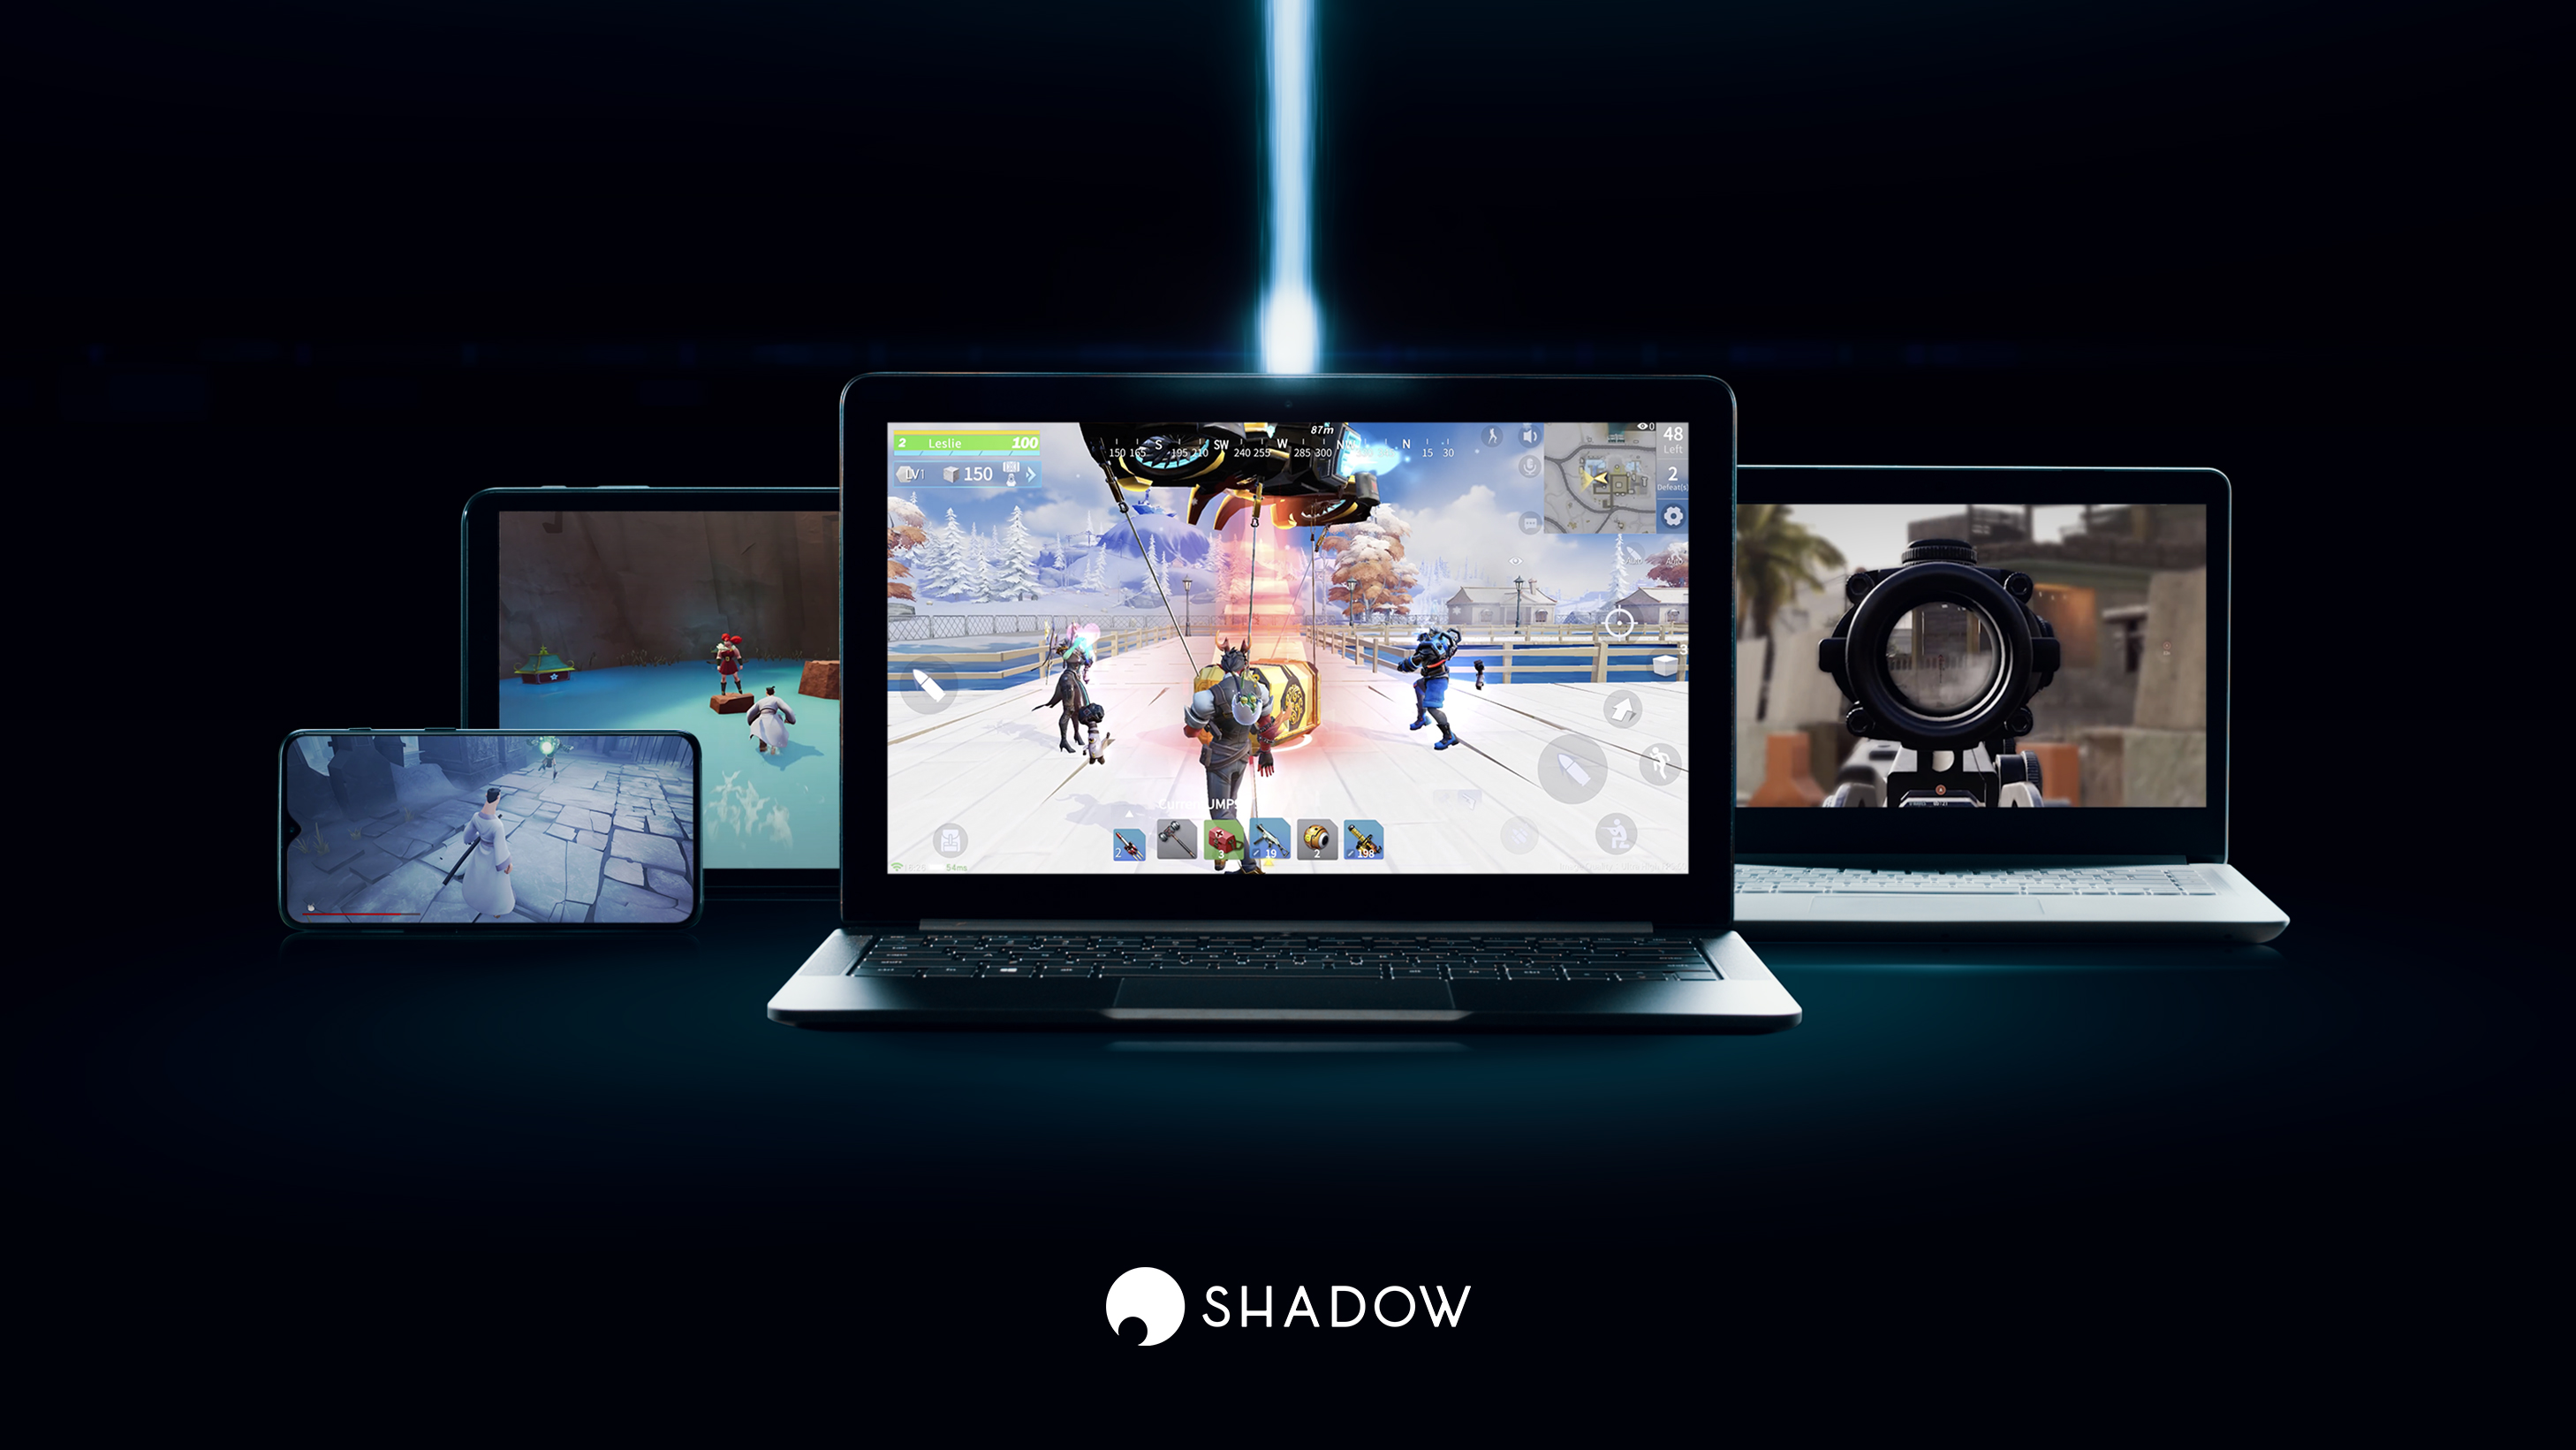 The Blade Shadows many devices